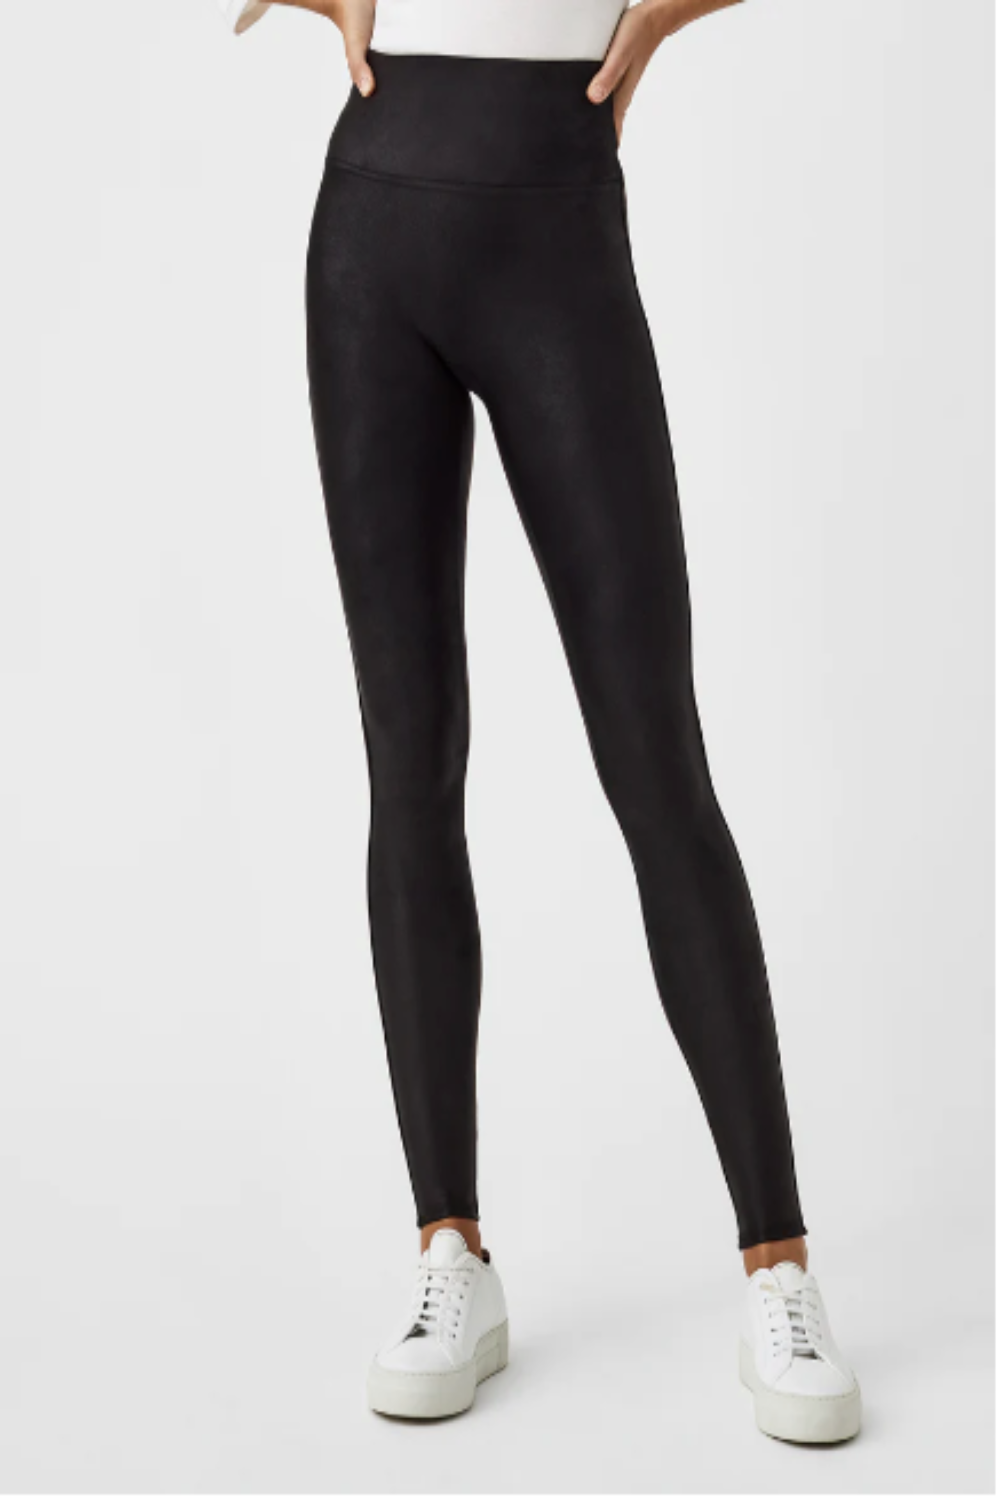 Doorbuster- She's Complicated Fleece Lined Faux Leather Leggings (Black)